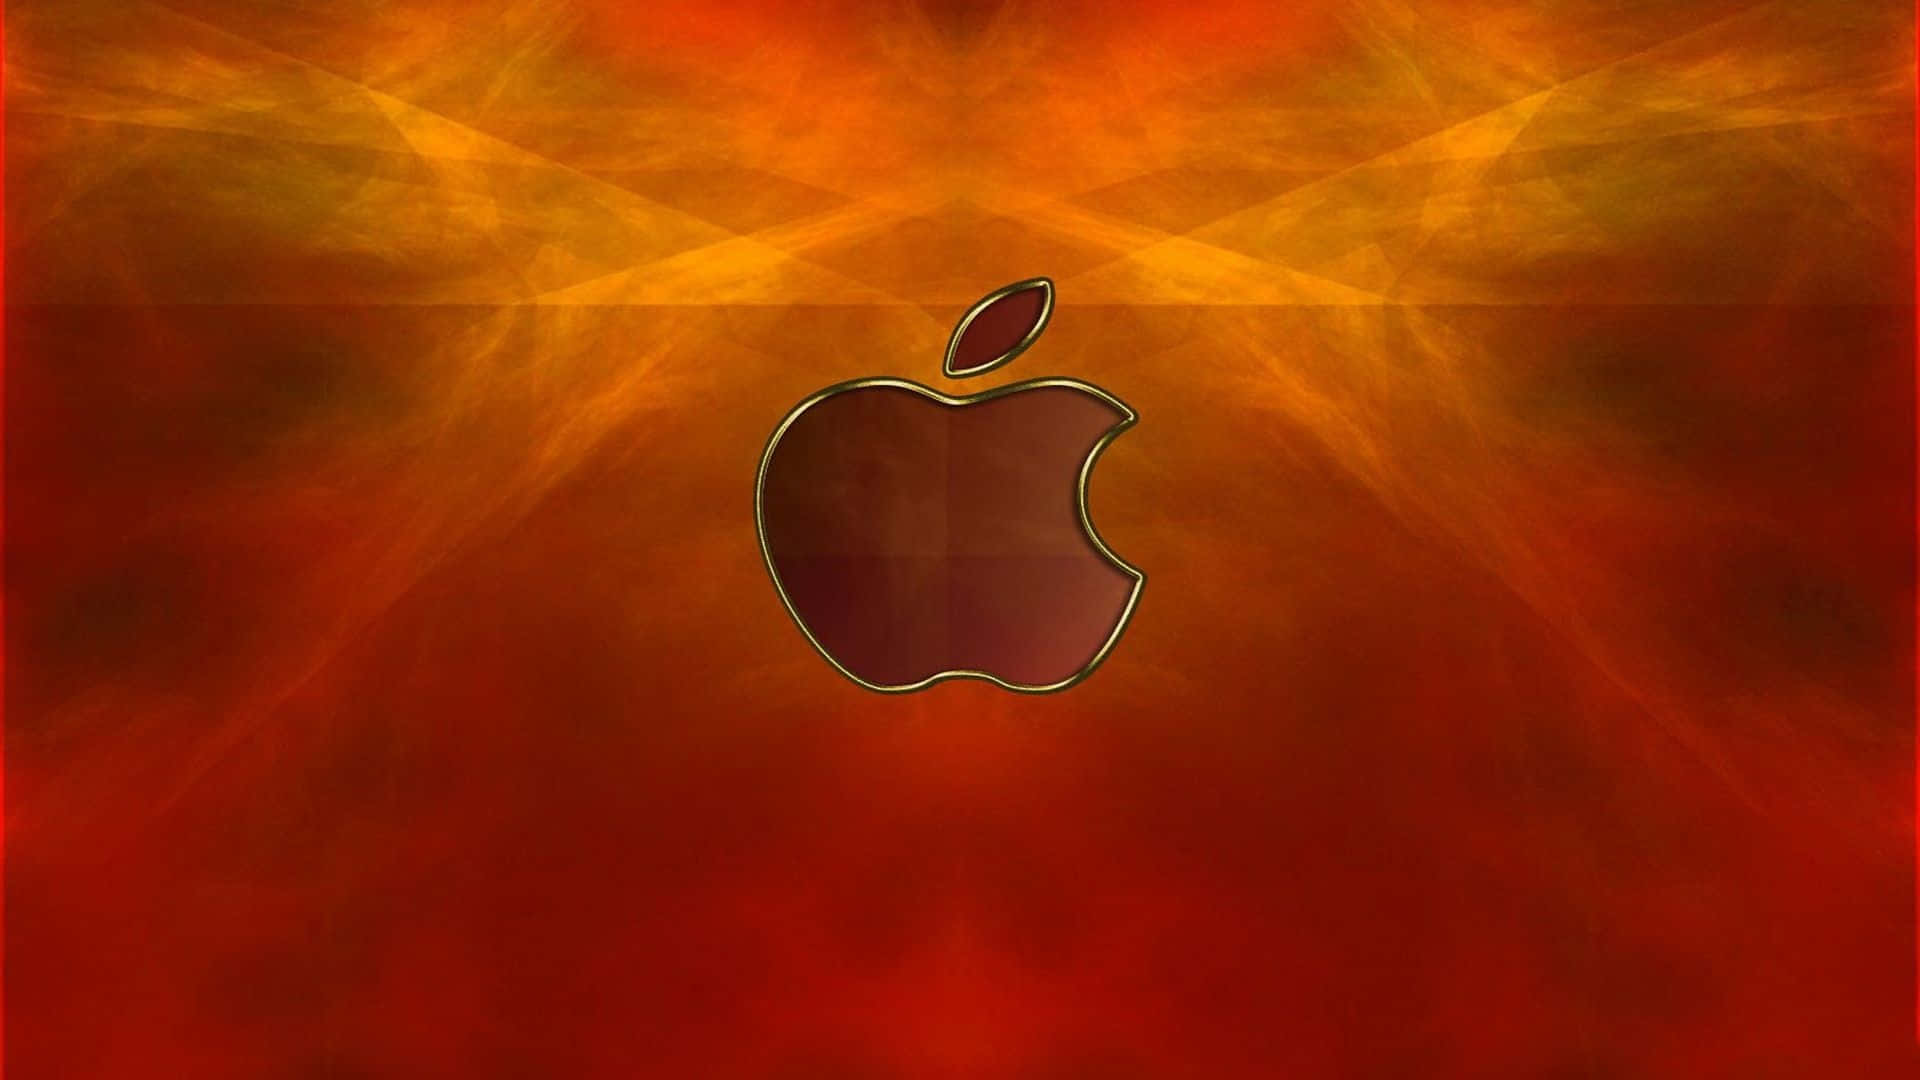 500+] Apple Background s for FREE 